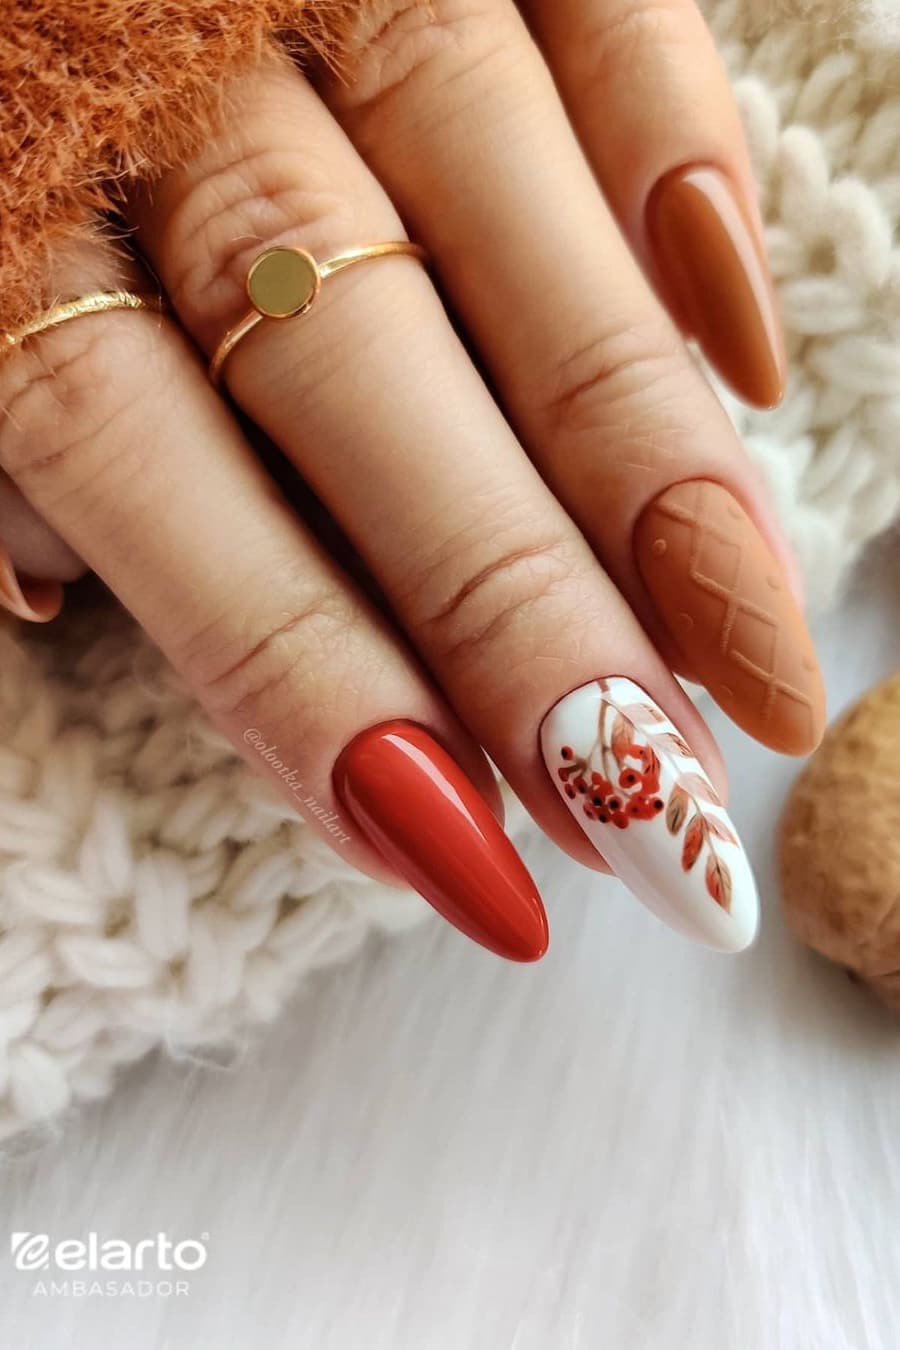 Warm-toned nails with plants